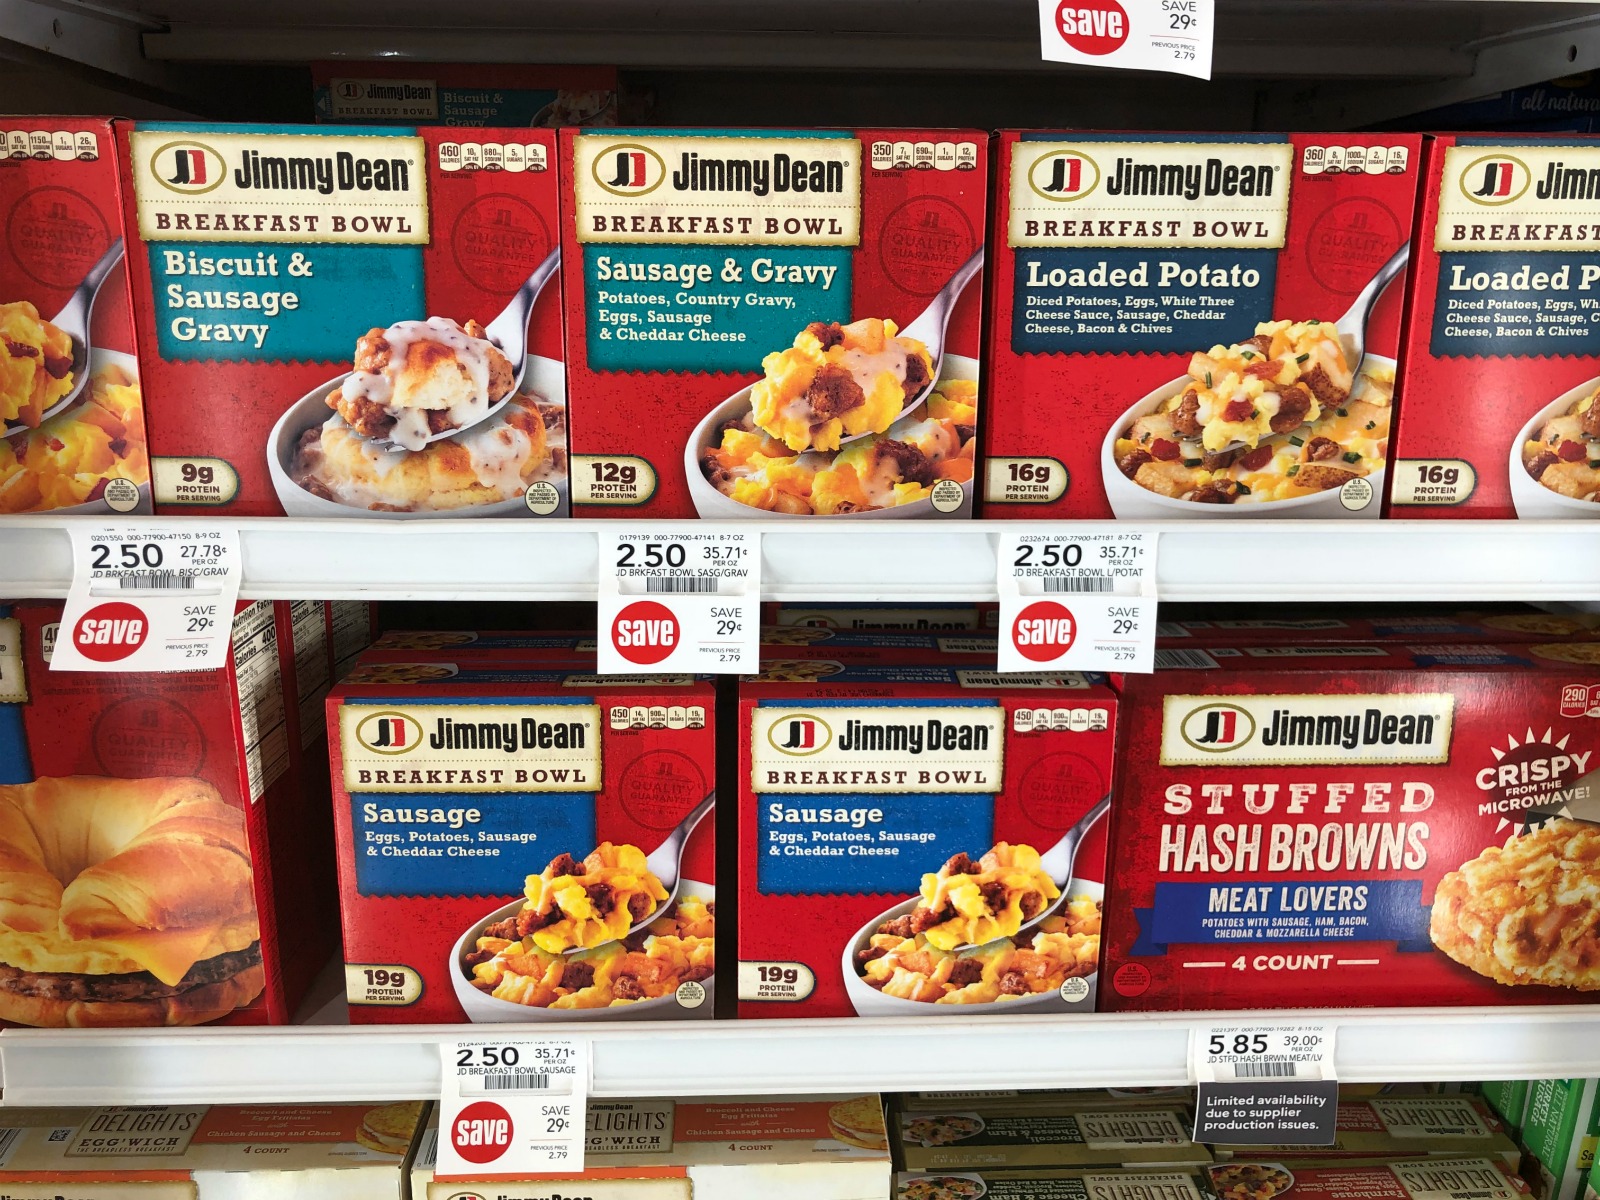 Save On Tasty Tyson® Products At Publix - Clip The High Value $3 Digital Coupon on I Heart Publix